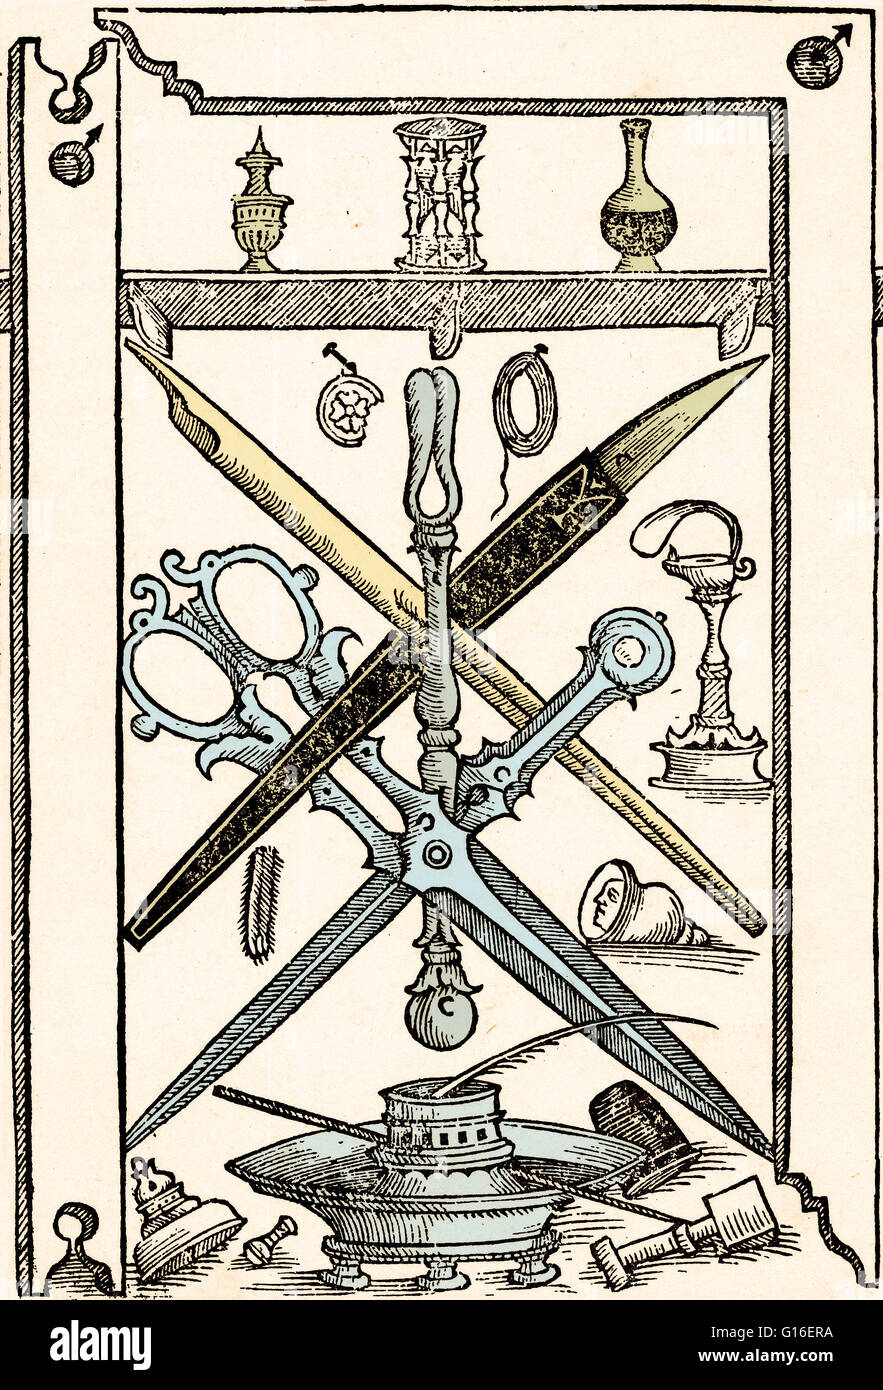 Color enhanced illustration of writing implements from Libro nuovo d'imparare a scrivere ('New Book for Learning to Write'), by Giambattista Palatino, 1540. The book turned out to be one of the most influential books on writing from the 16th century. Pala Stock Photo